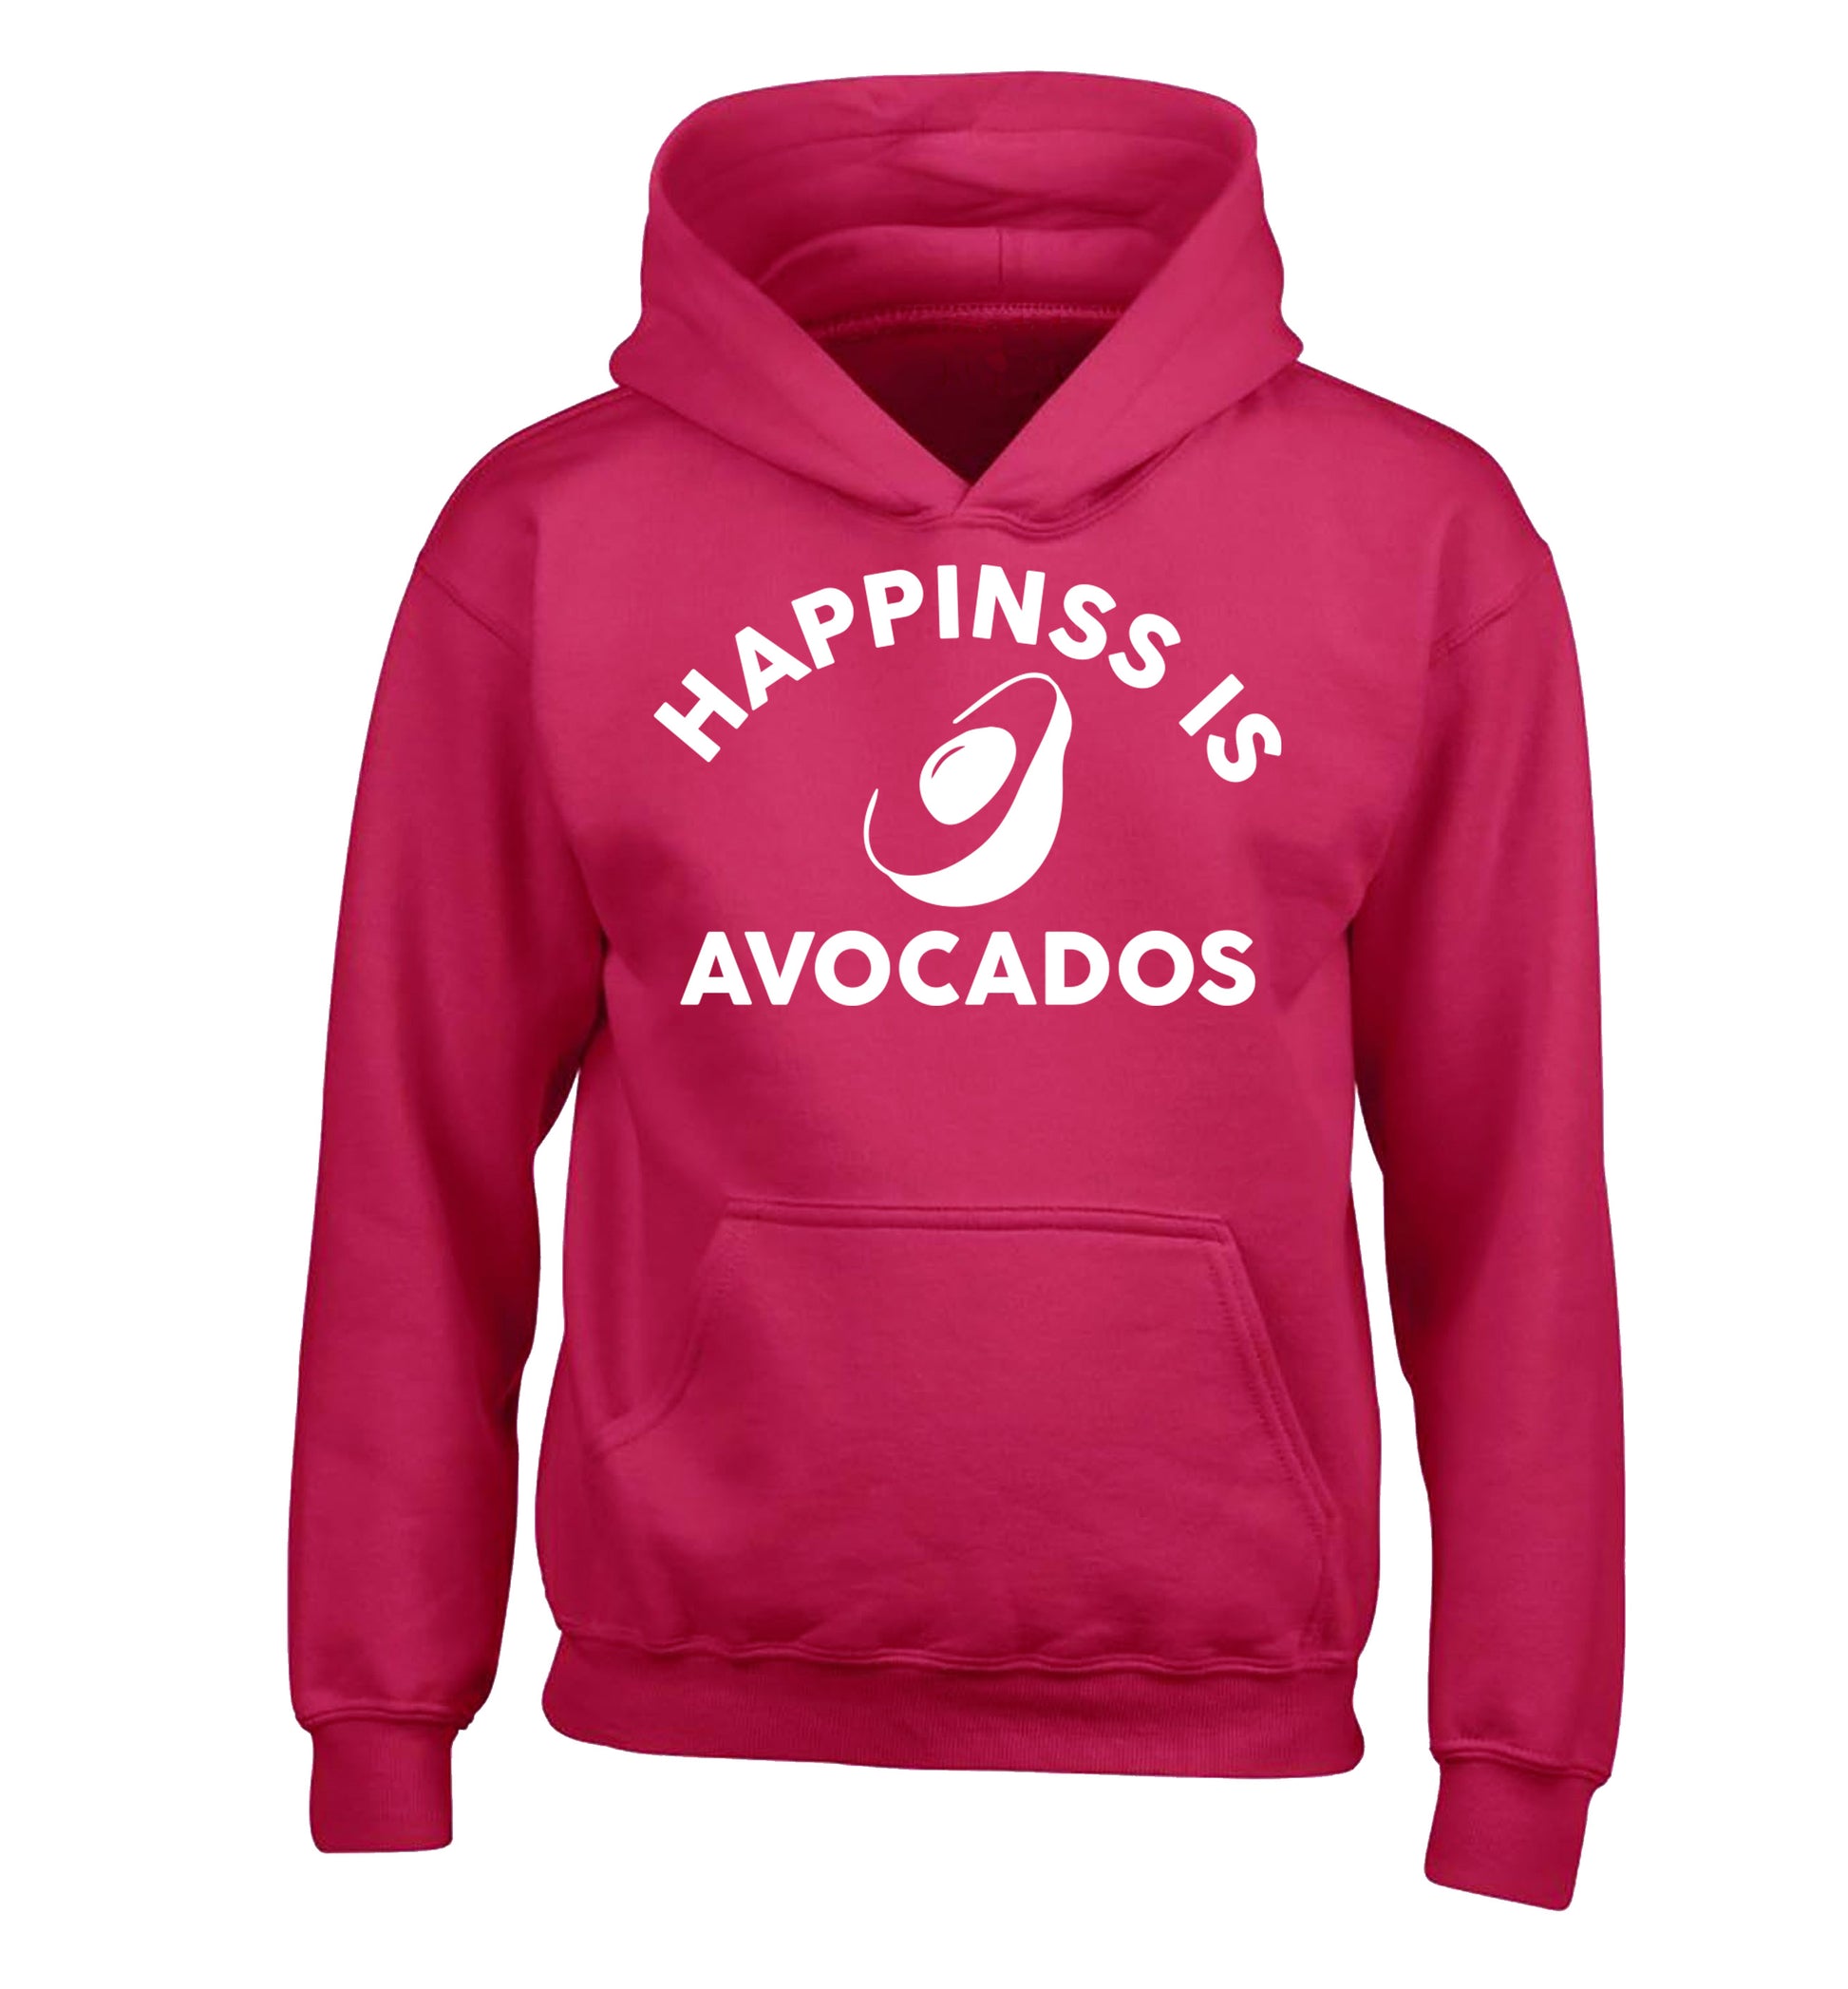 Happiness is avocados children's pink hoodie 12-14 Years